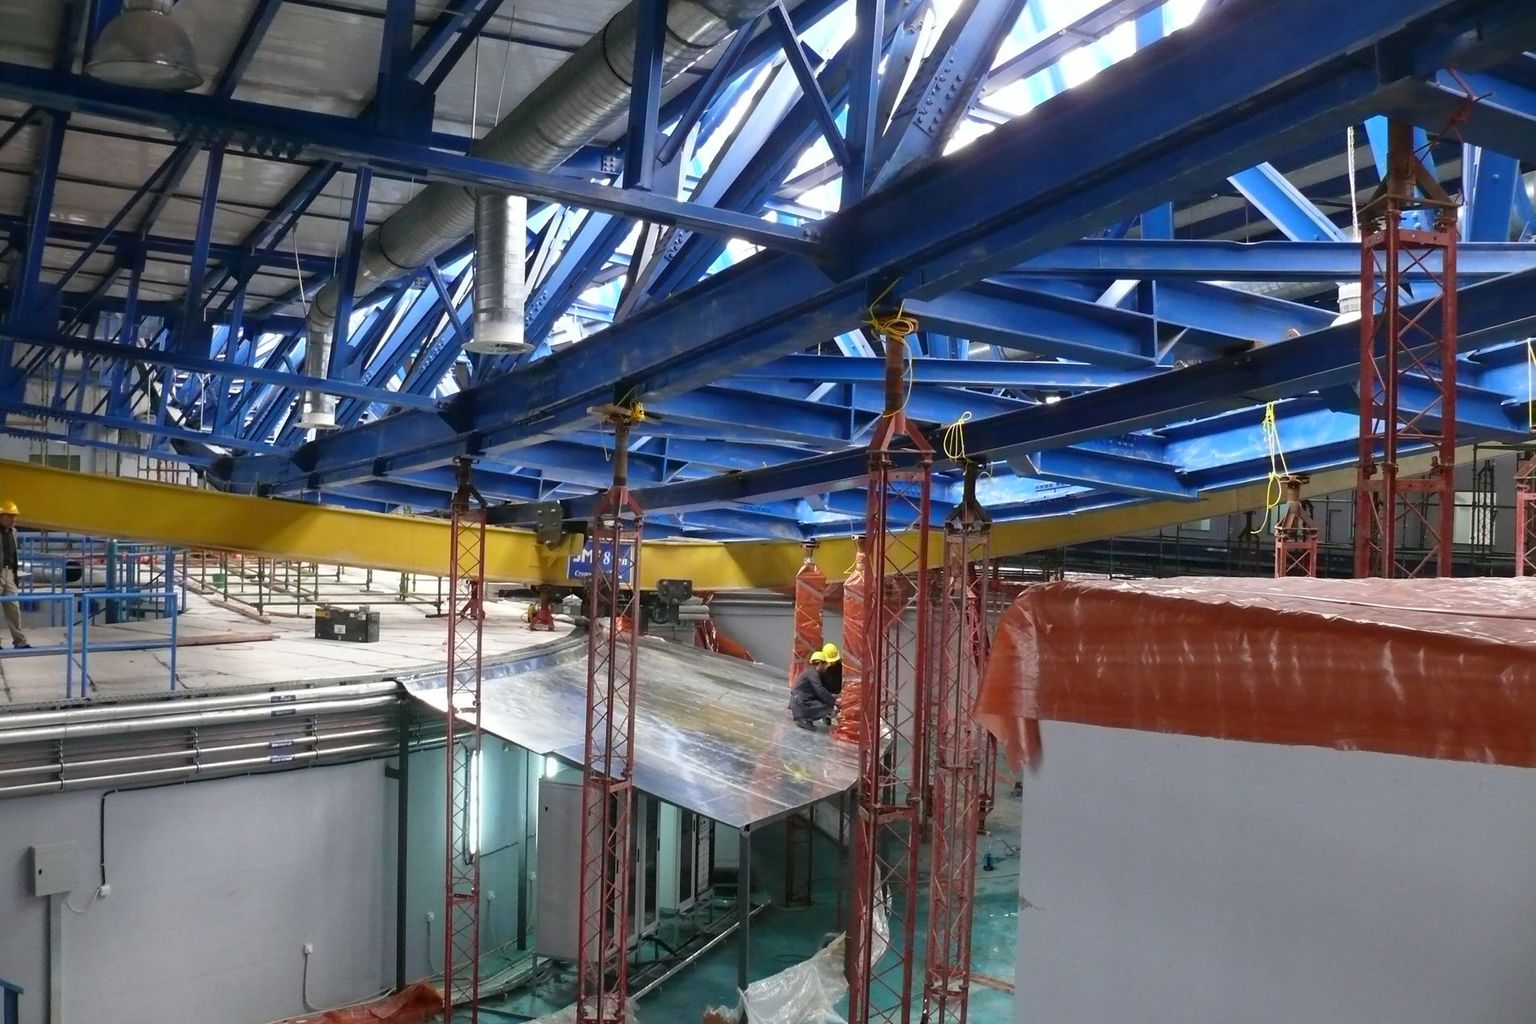 In 2014, the roof of the SESAME hall collapsed under the weight of snow – neither persons nor the synchrotron were harmed.